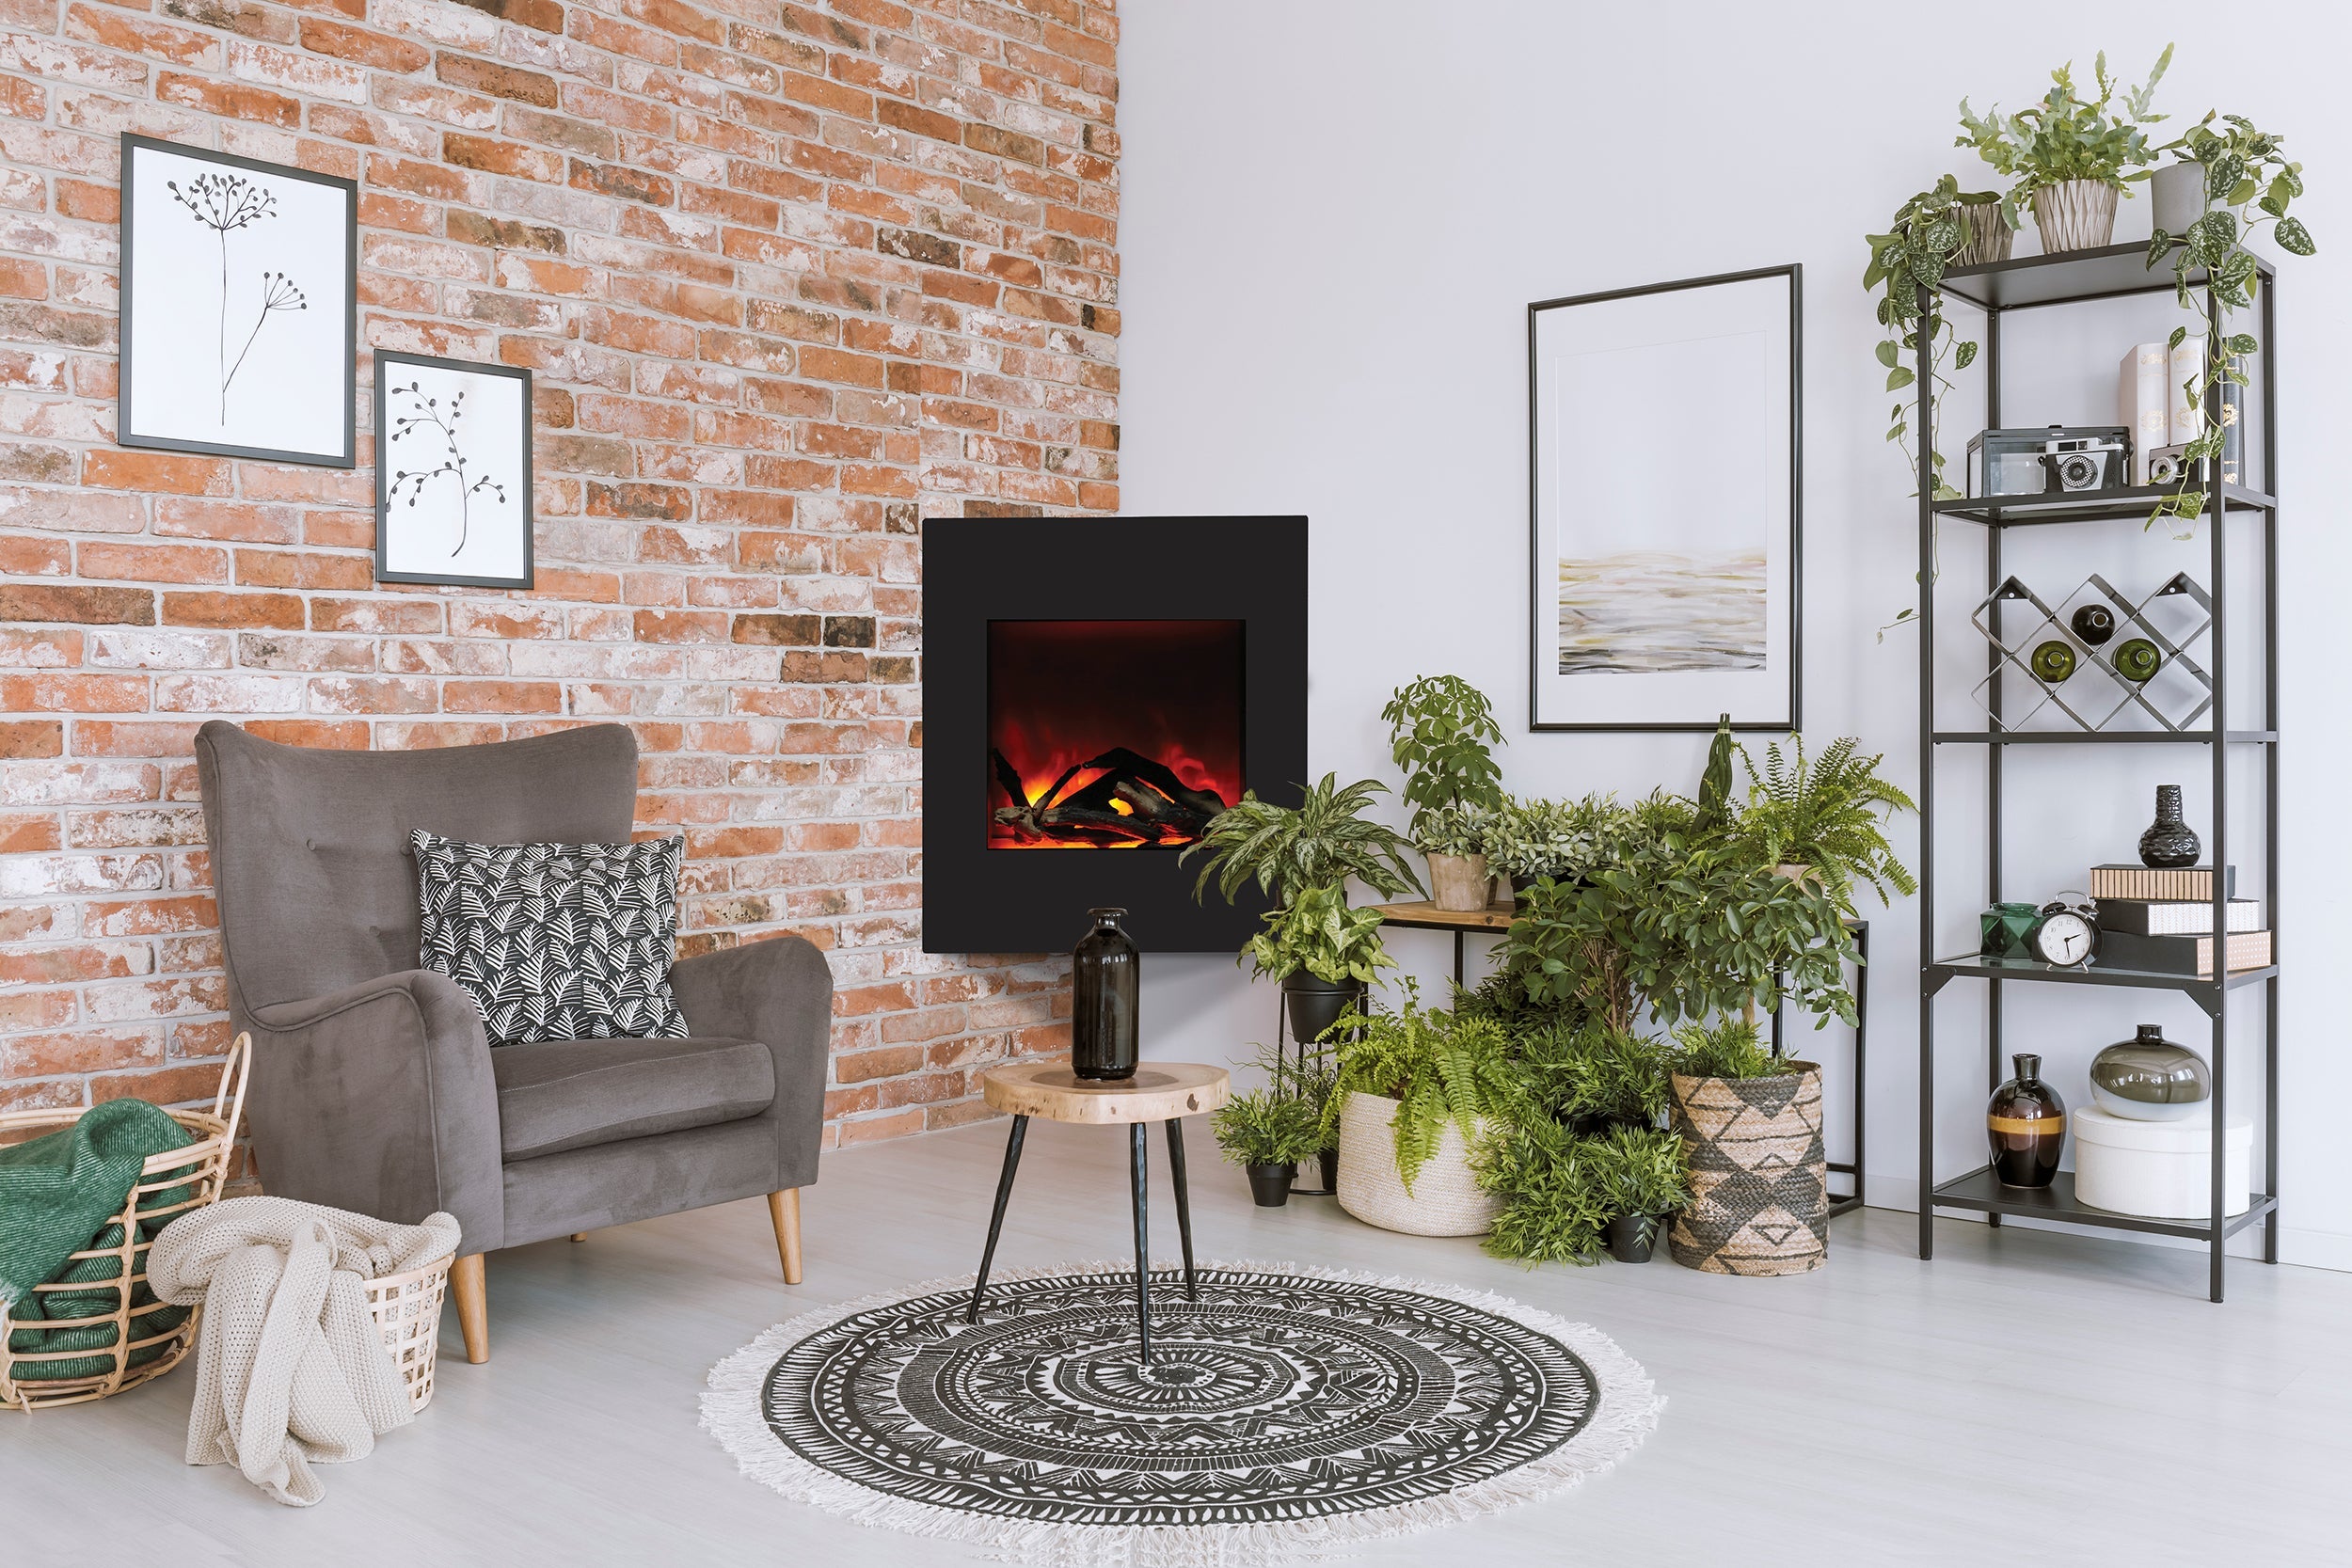 Amantii 24" Zero Clearance Electric Fireplace with Black Glass Surround and Log Set -WM-BI-2428-VLR-BG- Lifestyle Living Room